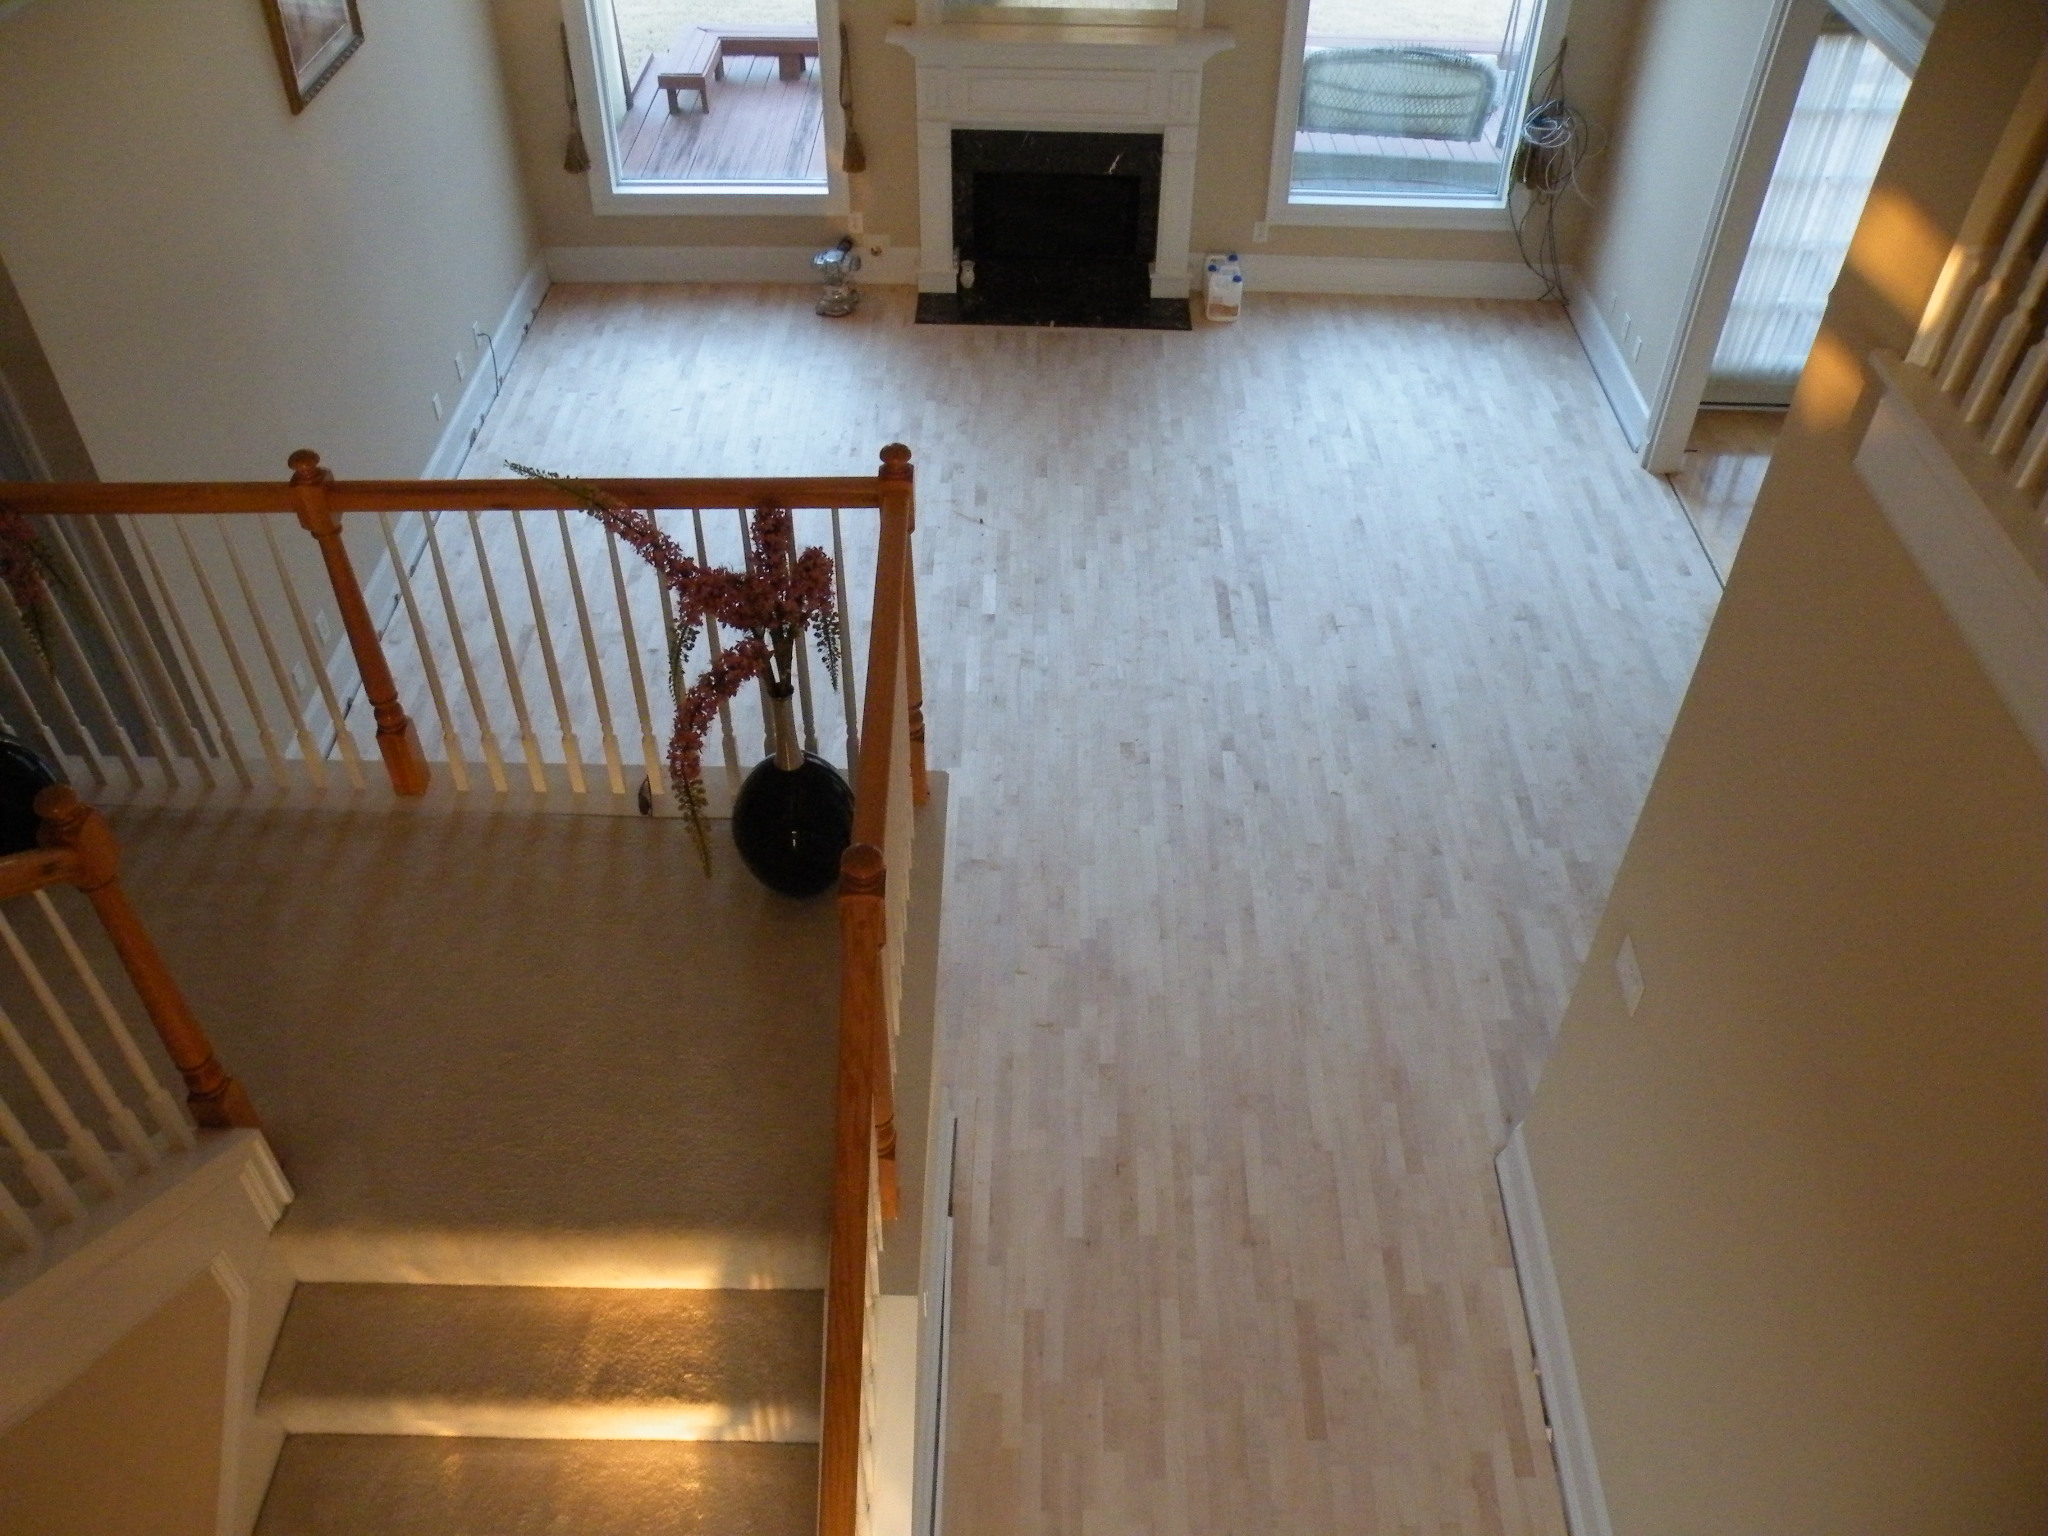 Hardwood floor installation and refinishing in Lawrenceville, GA - After Install